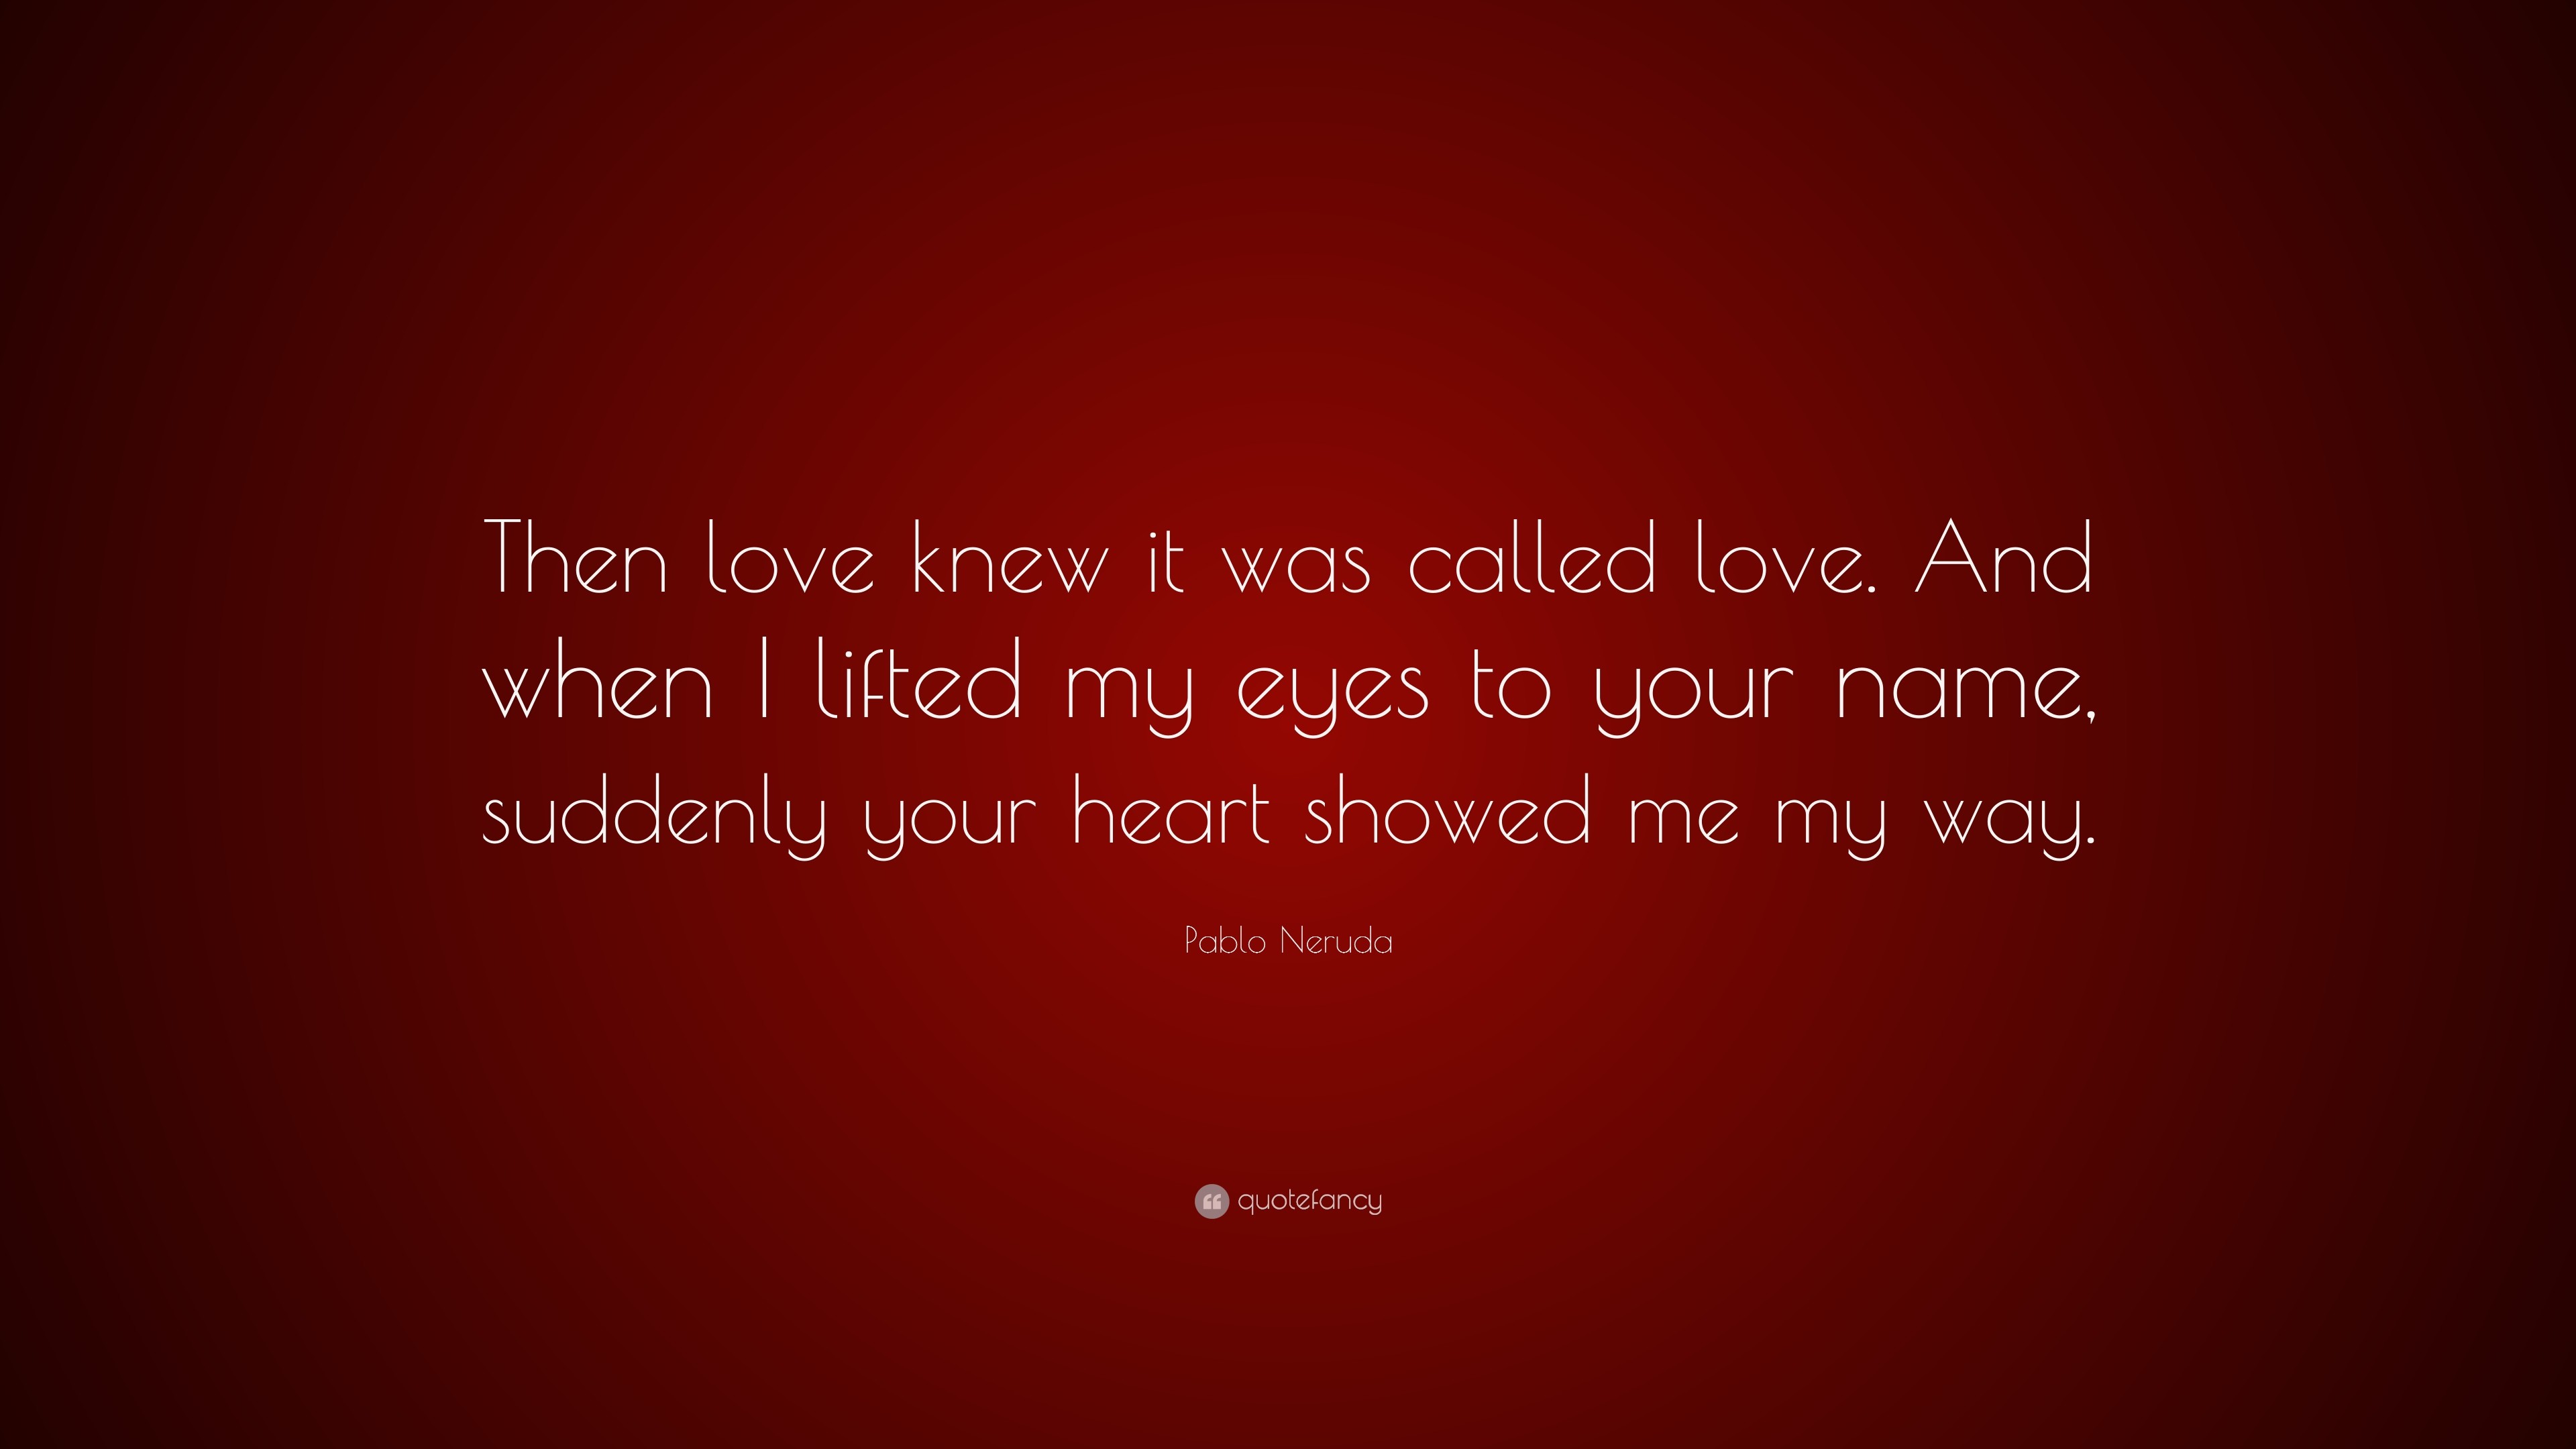 3840x2160 Pablo Neruda Quote: “Then love knew it was called love. And when I